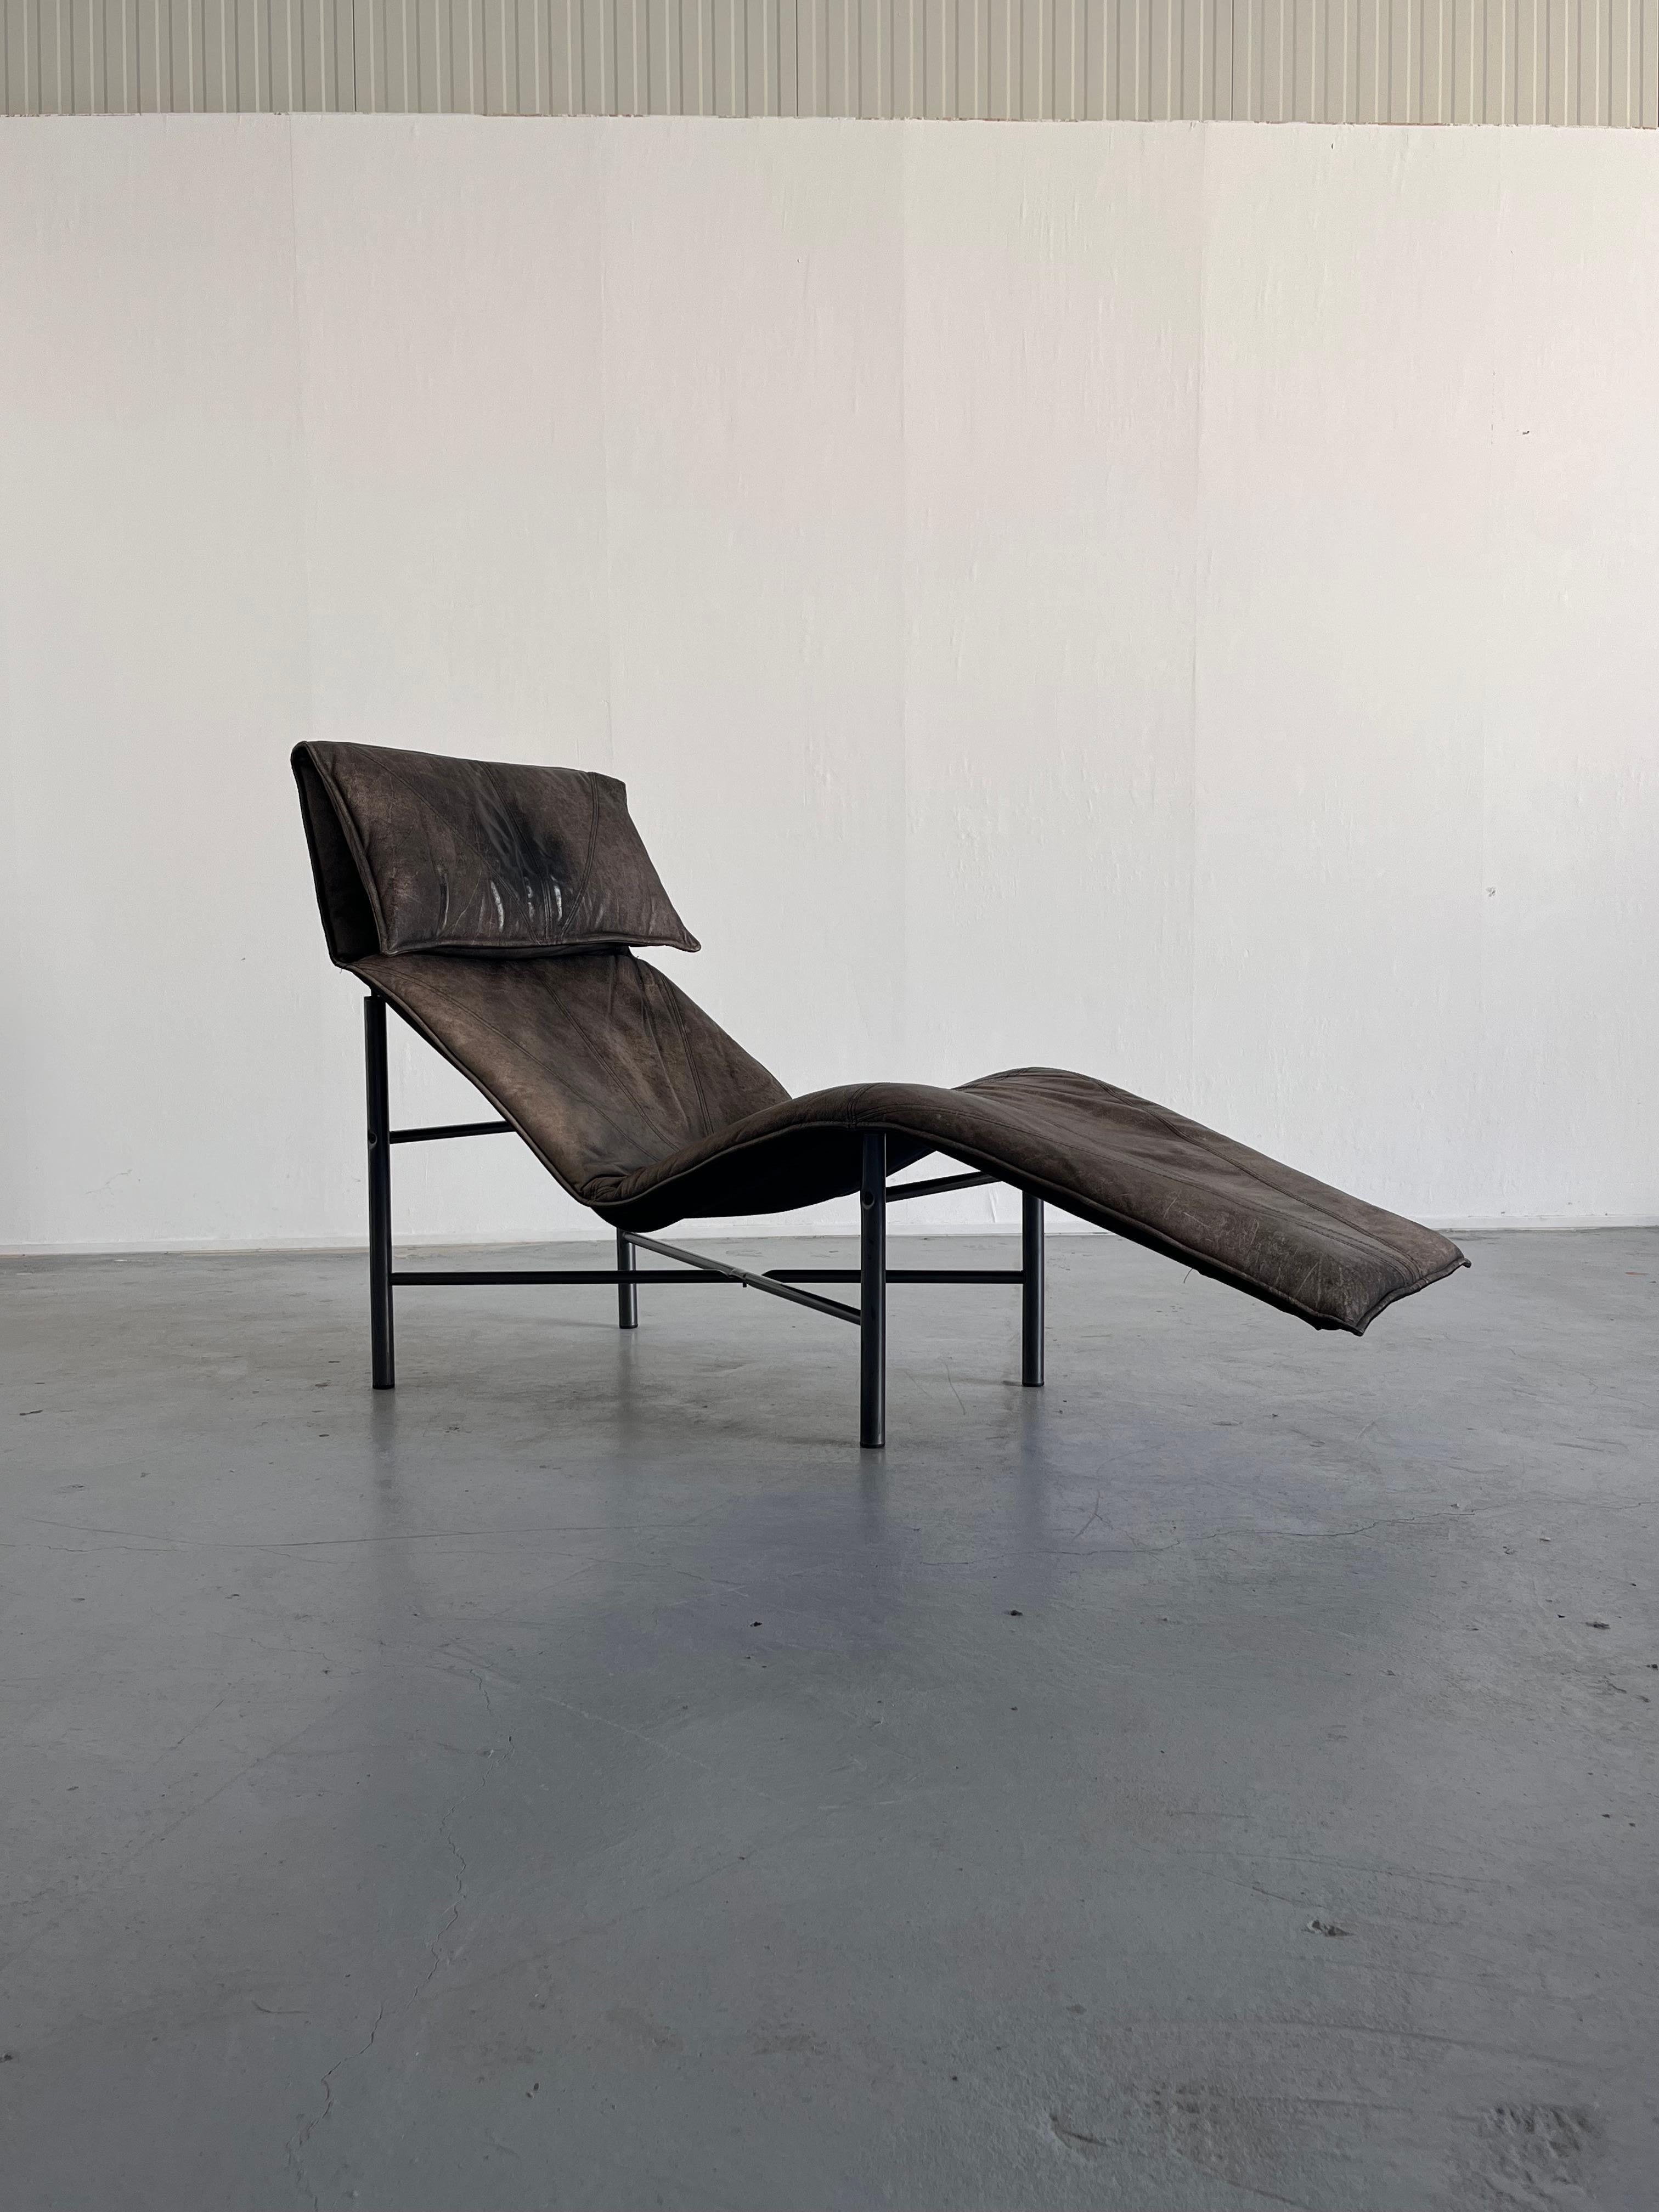 Modern freestanding vintage chaise longue or daybed from brown stitched leather and metal by Tord Bjorklund for Ikea, 1980s.

A stylish and very comfortable chaise longue or daybed from metal with a loose cushion from thick stitched leather in dark